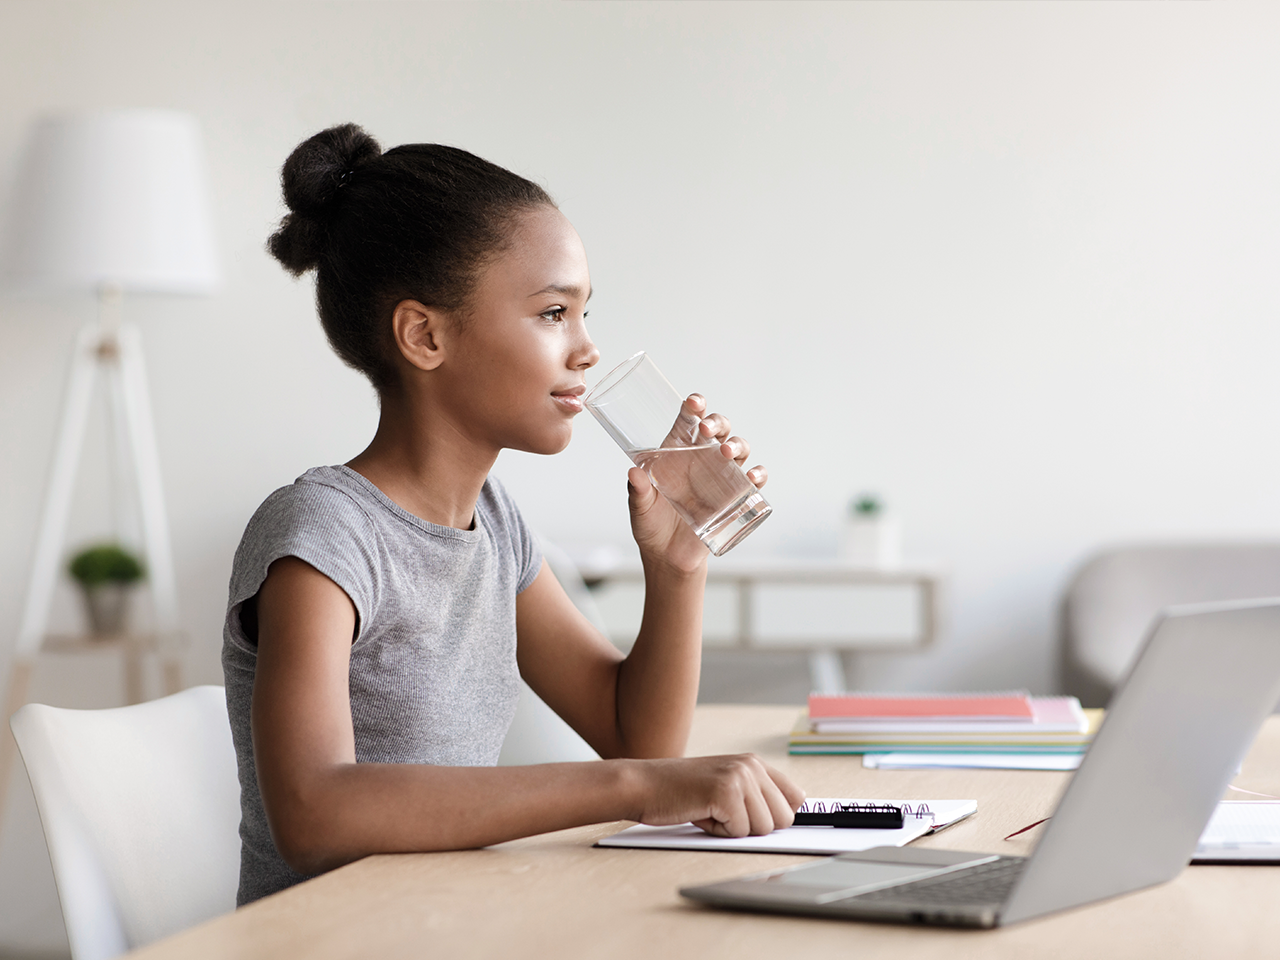 What should I do if my child is dehydrated?